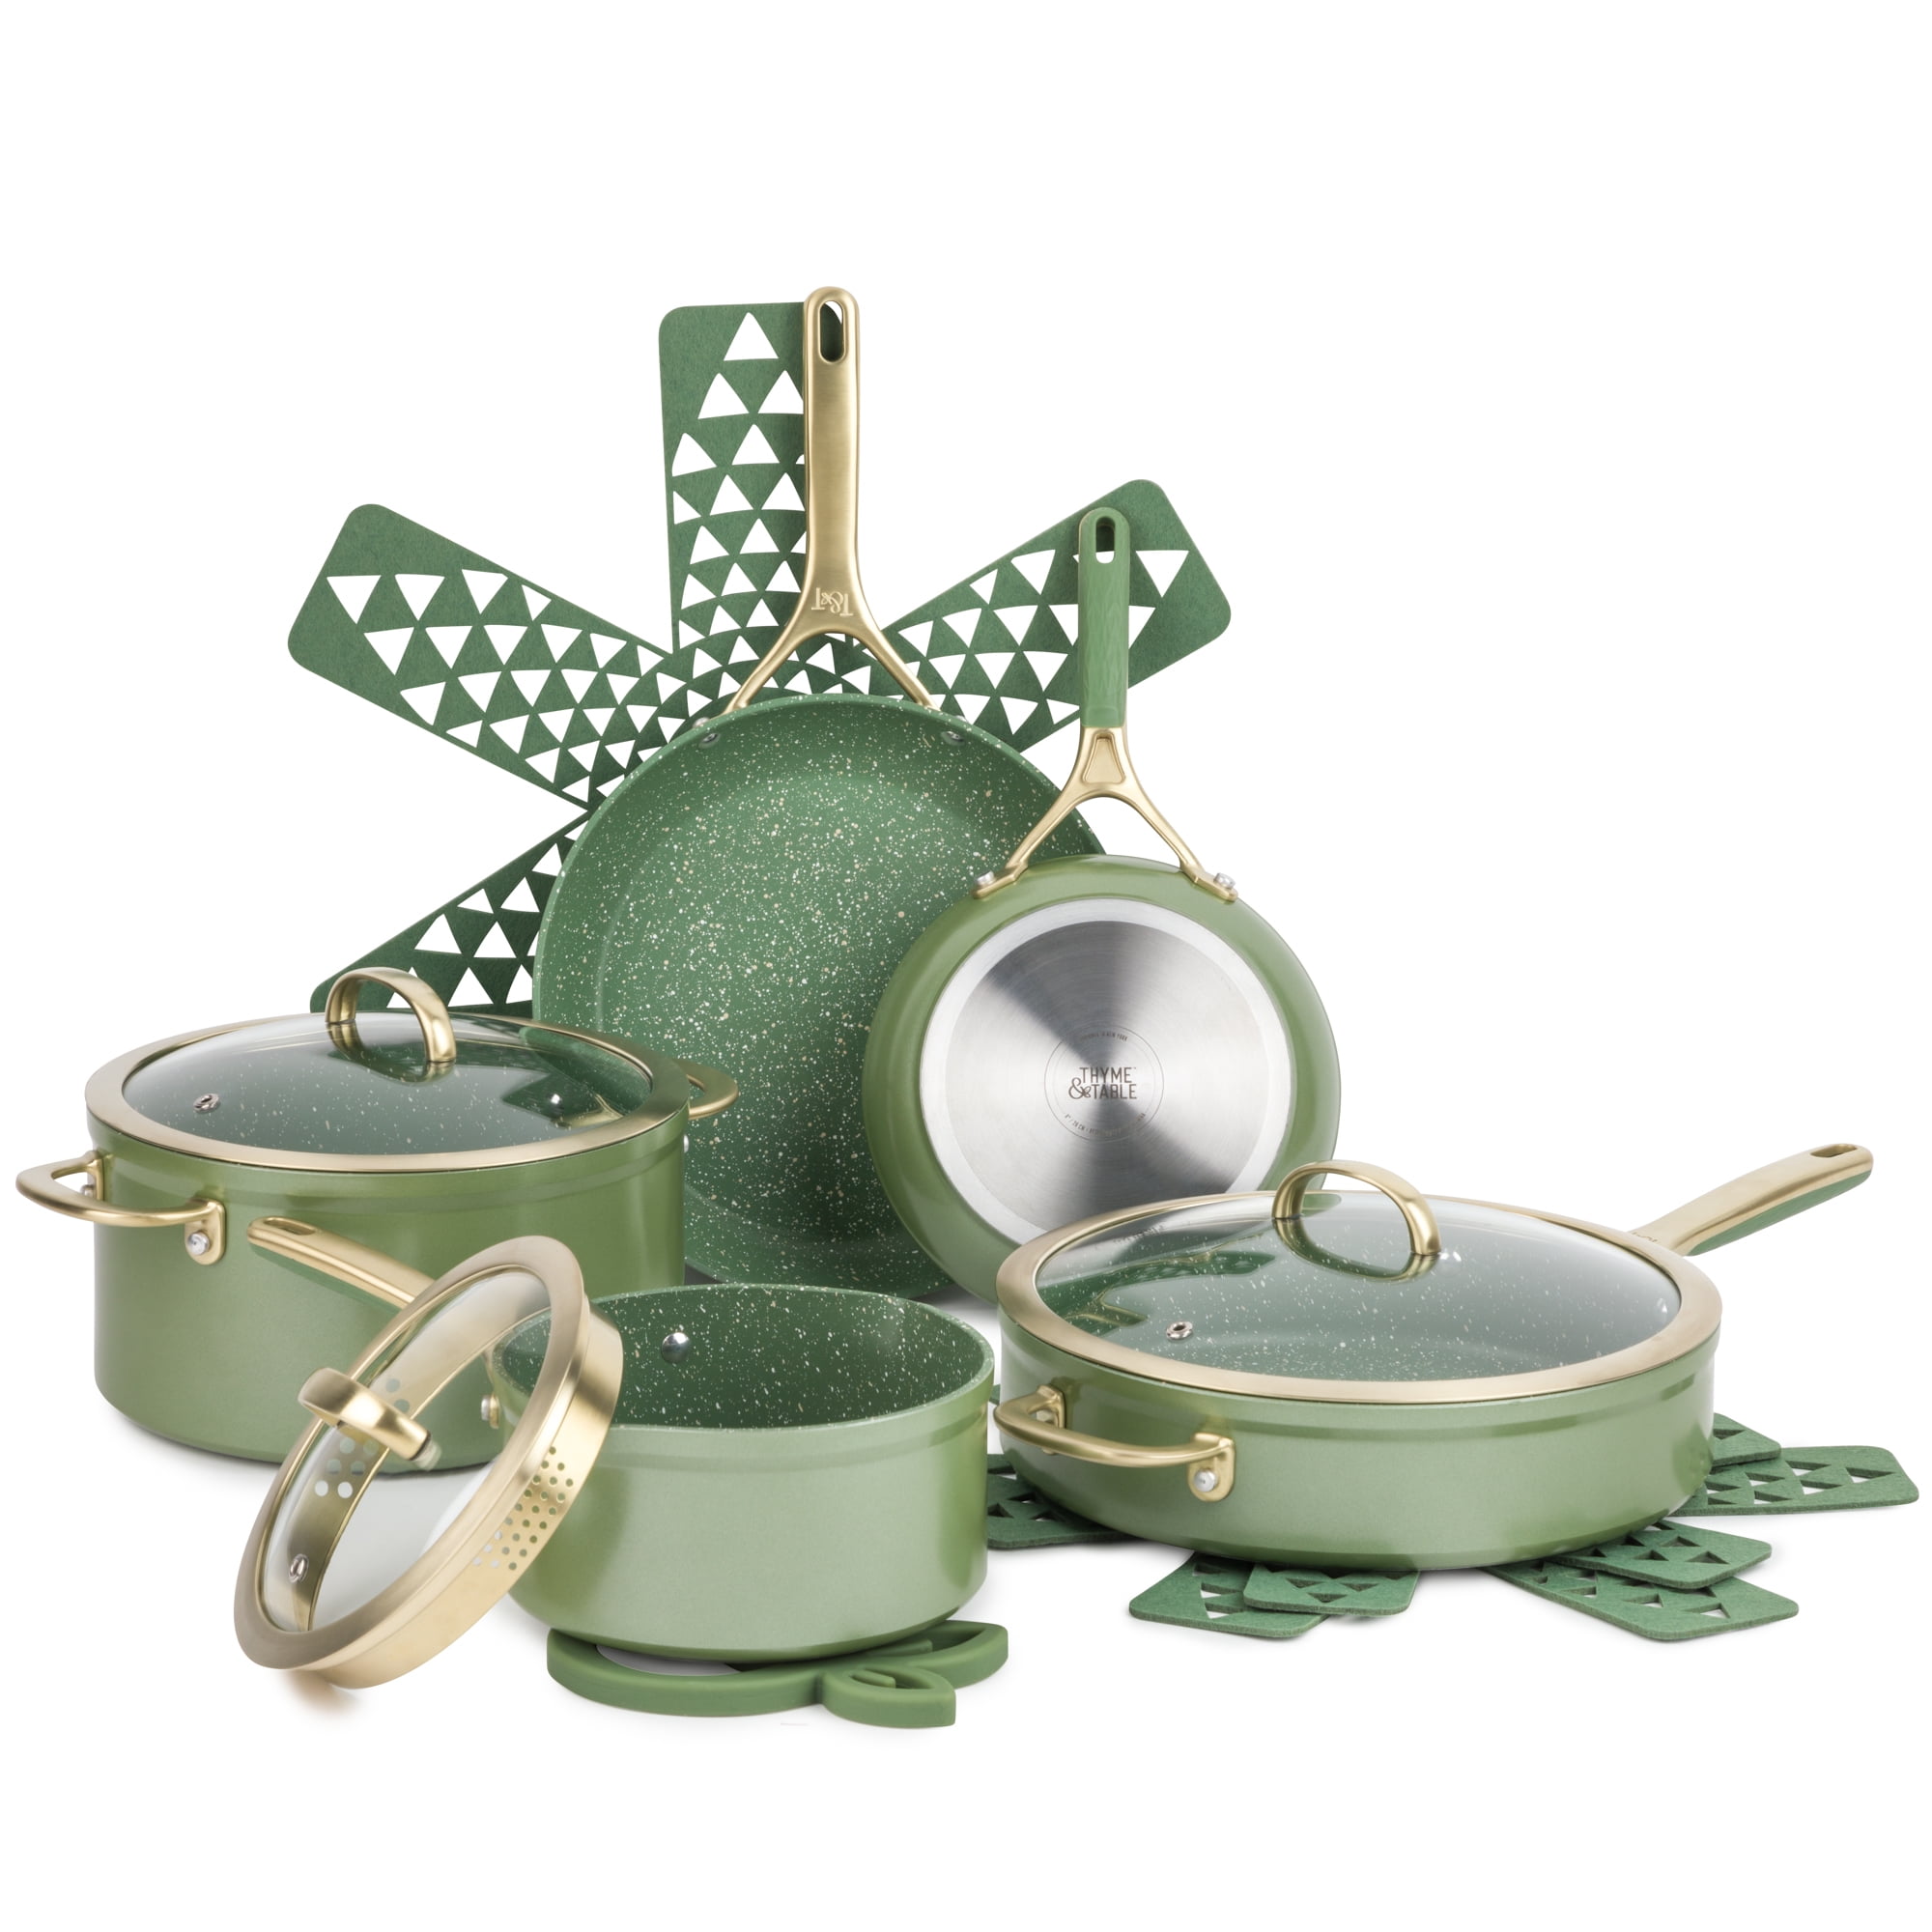 Walmart Corinth - Get this 28-piece Thyme & Table cookware and bakeware set  for the low price of $79!! #wm105 #dealsfordays